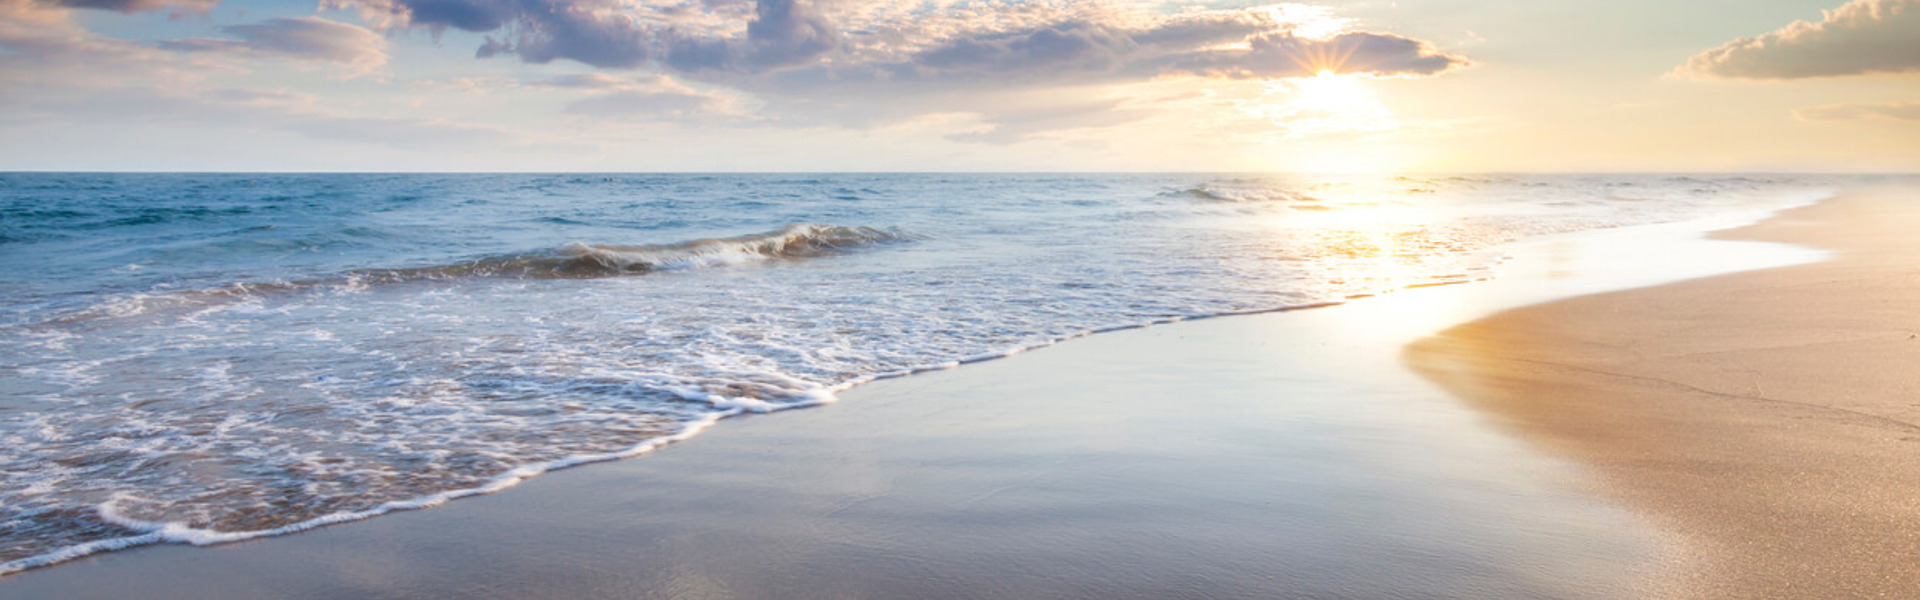 a landscape picture of waves on a sandy beach with a sunset in the background